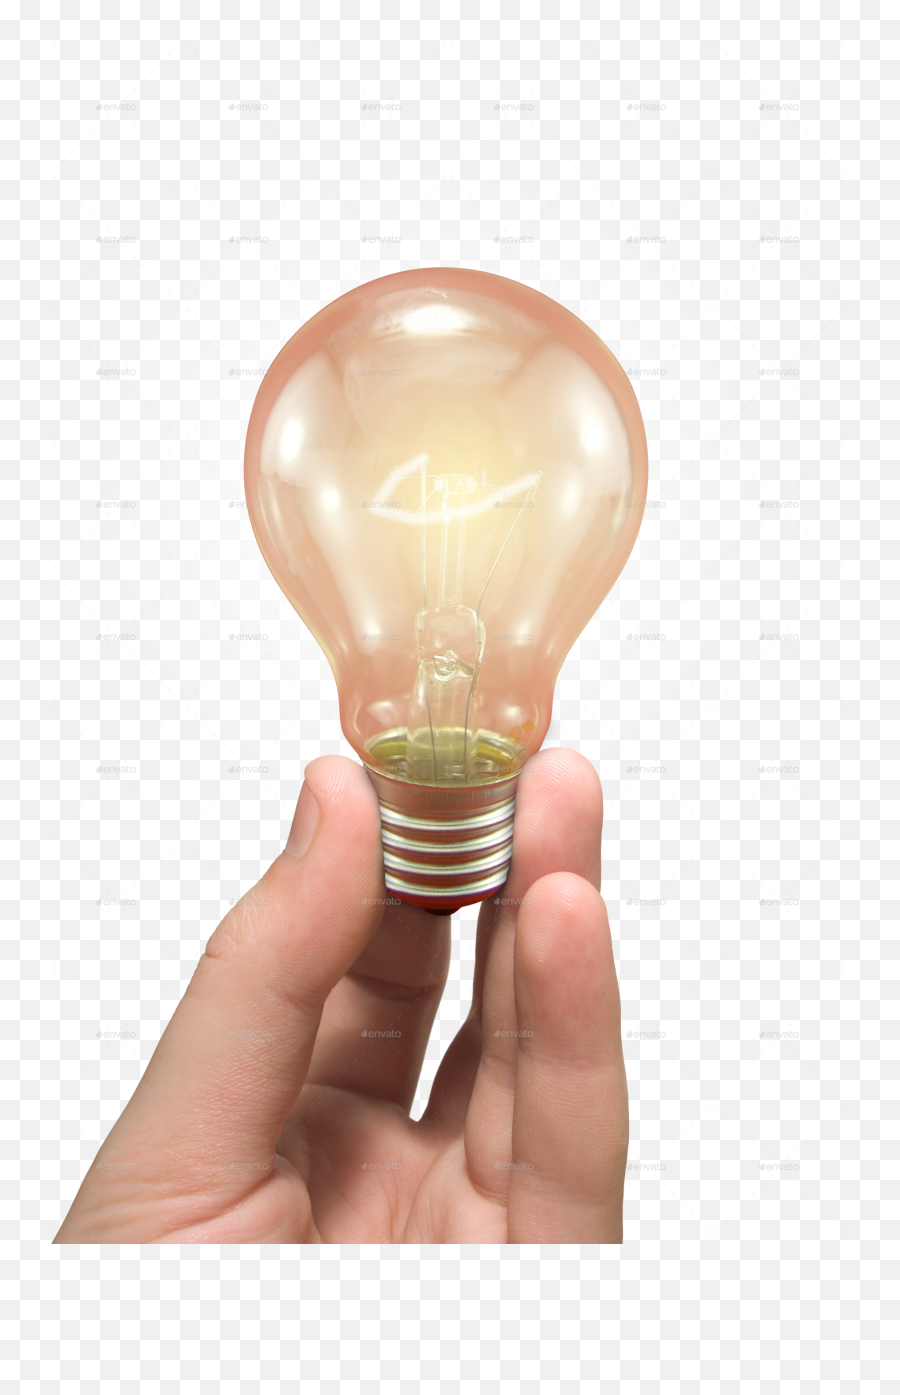 Download Image Preview Setbulb 1 - Hand Light Bulb Png Hand With Light Bulb Png,Bulb Png